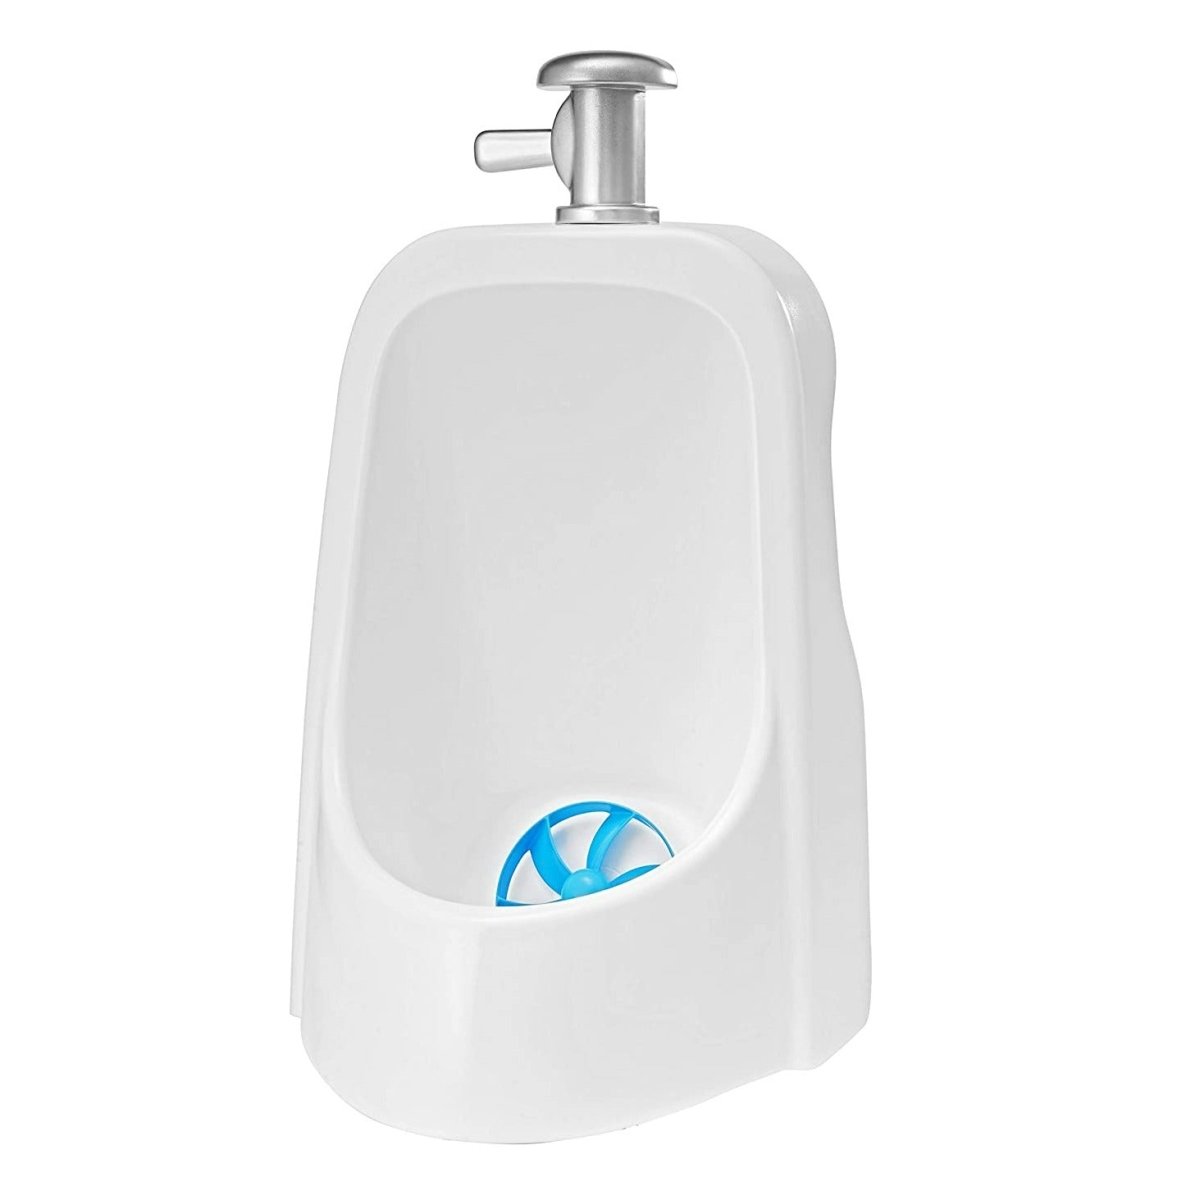 Summer Infant My Size Urinal 1L - White - 11860